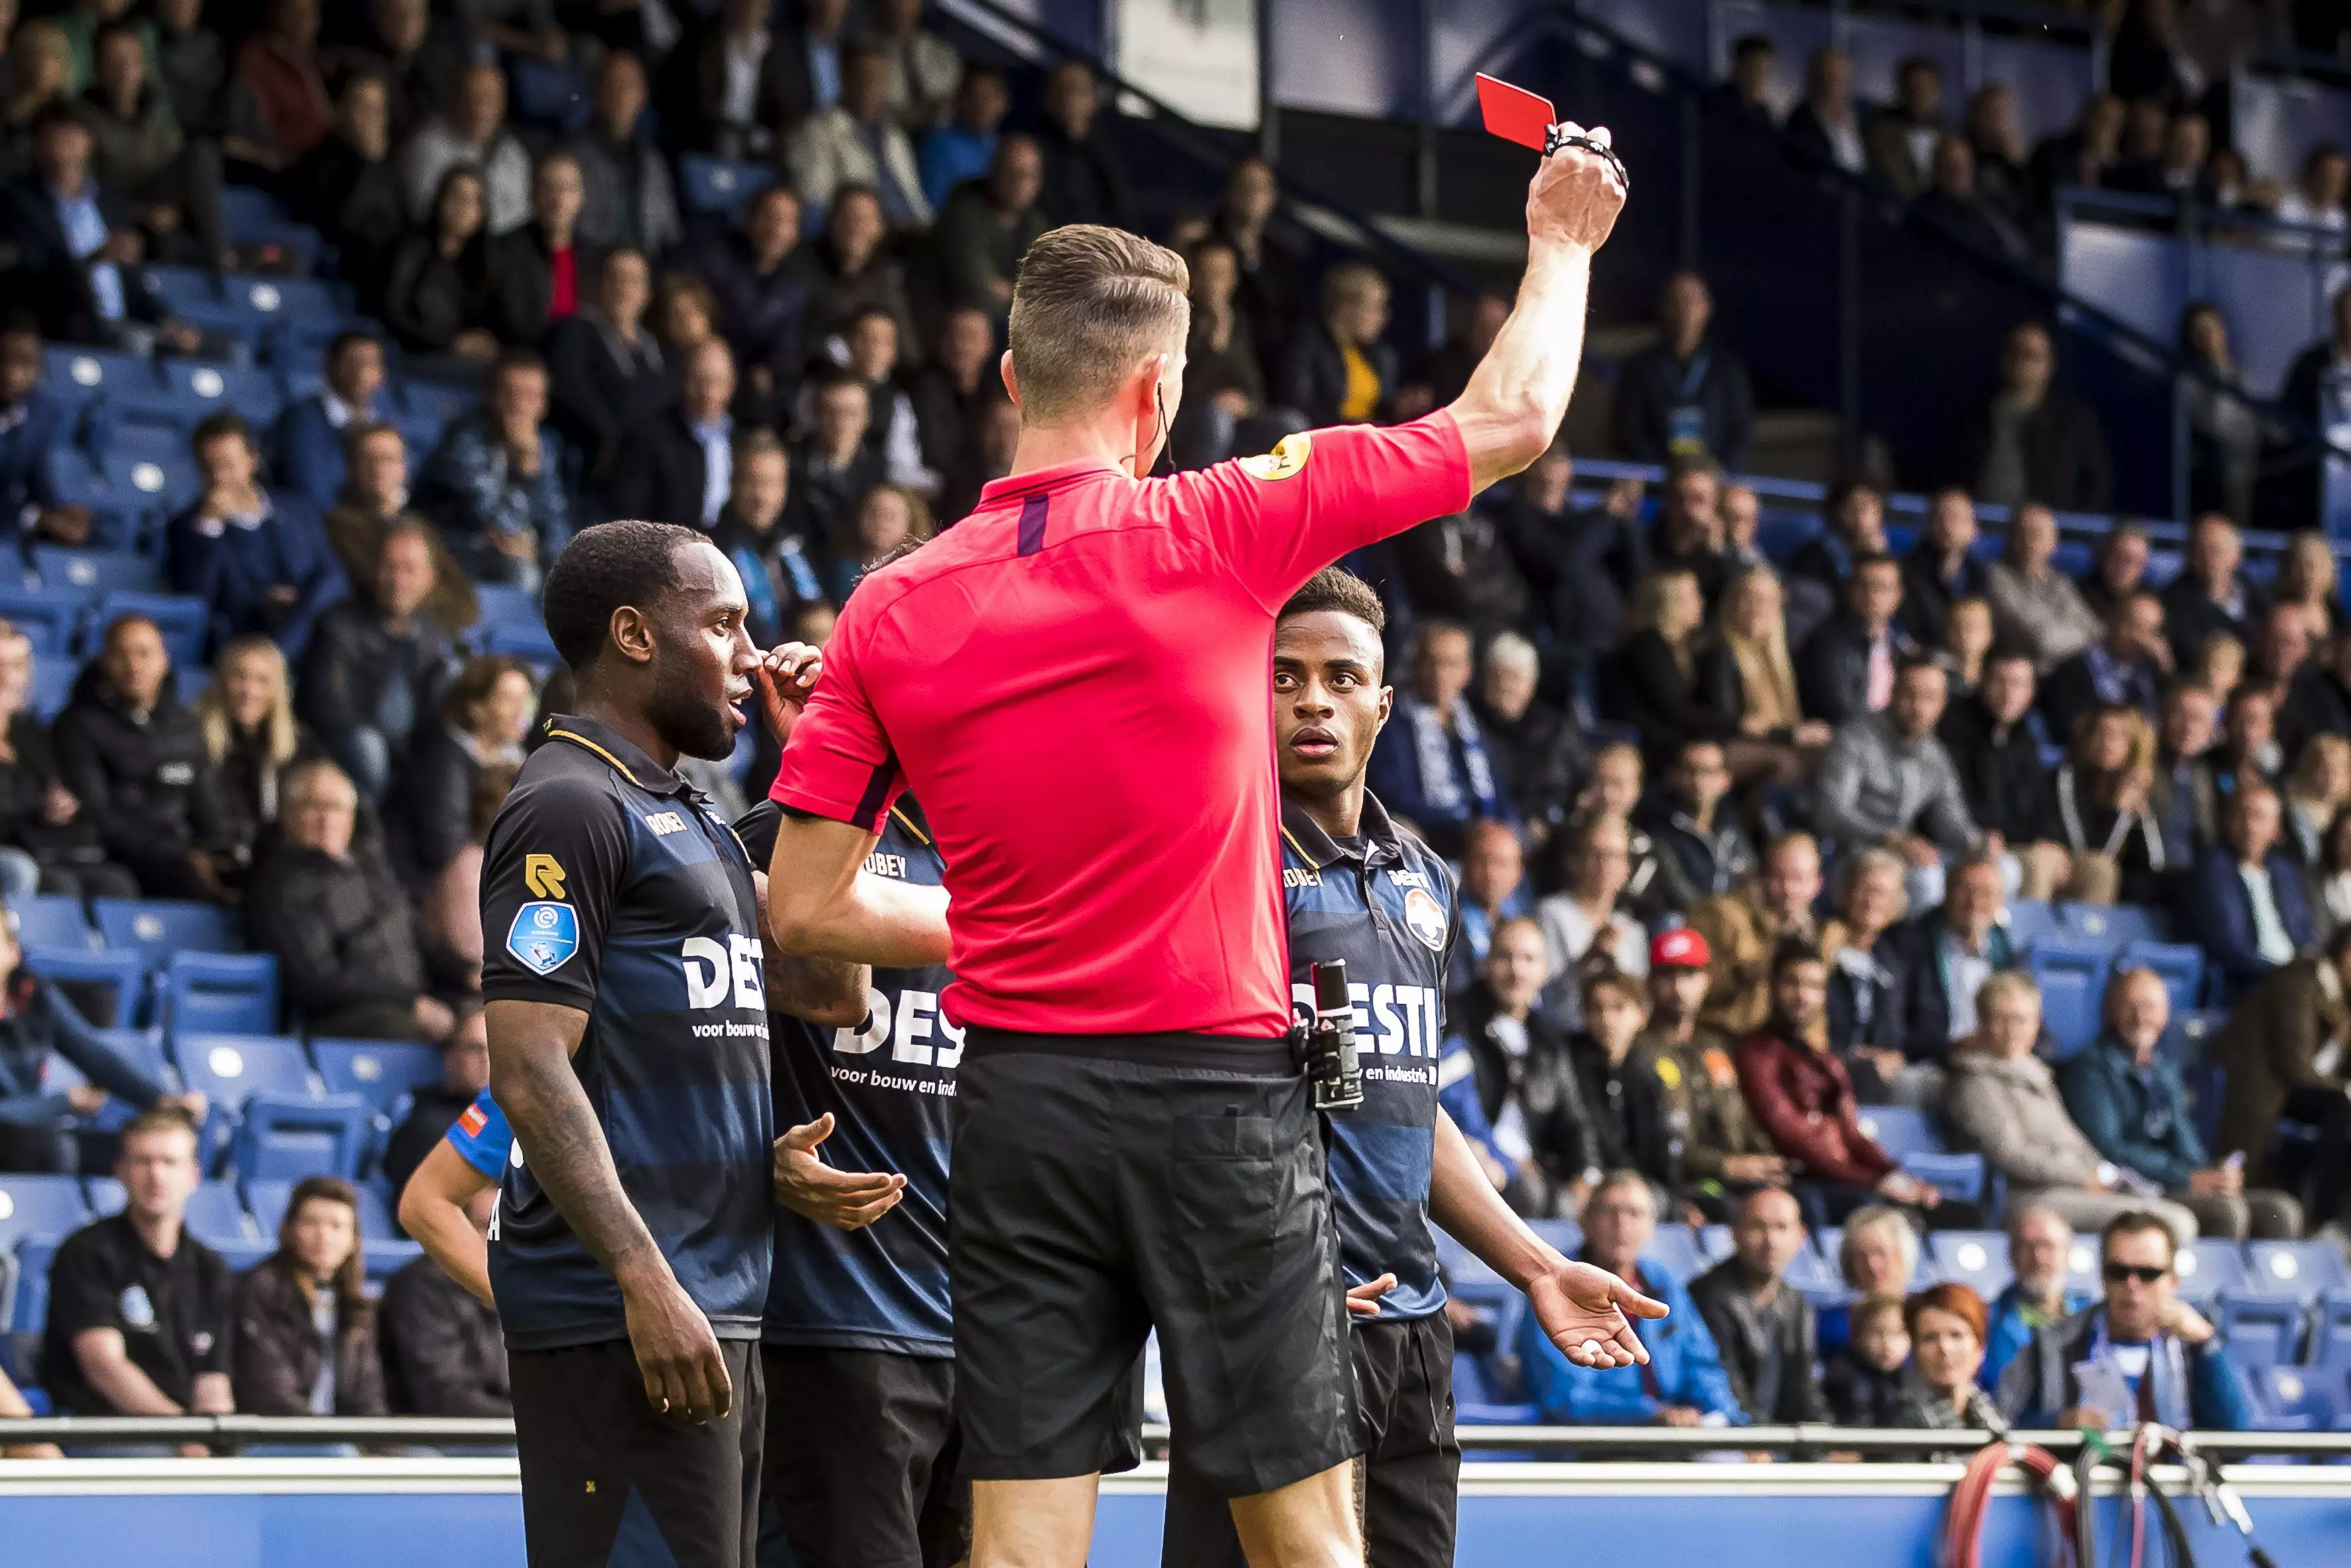 Referee Given Three Week Suspension After Forgetting His Coin